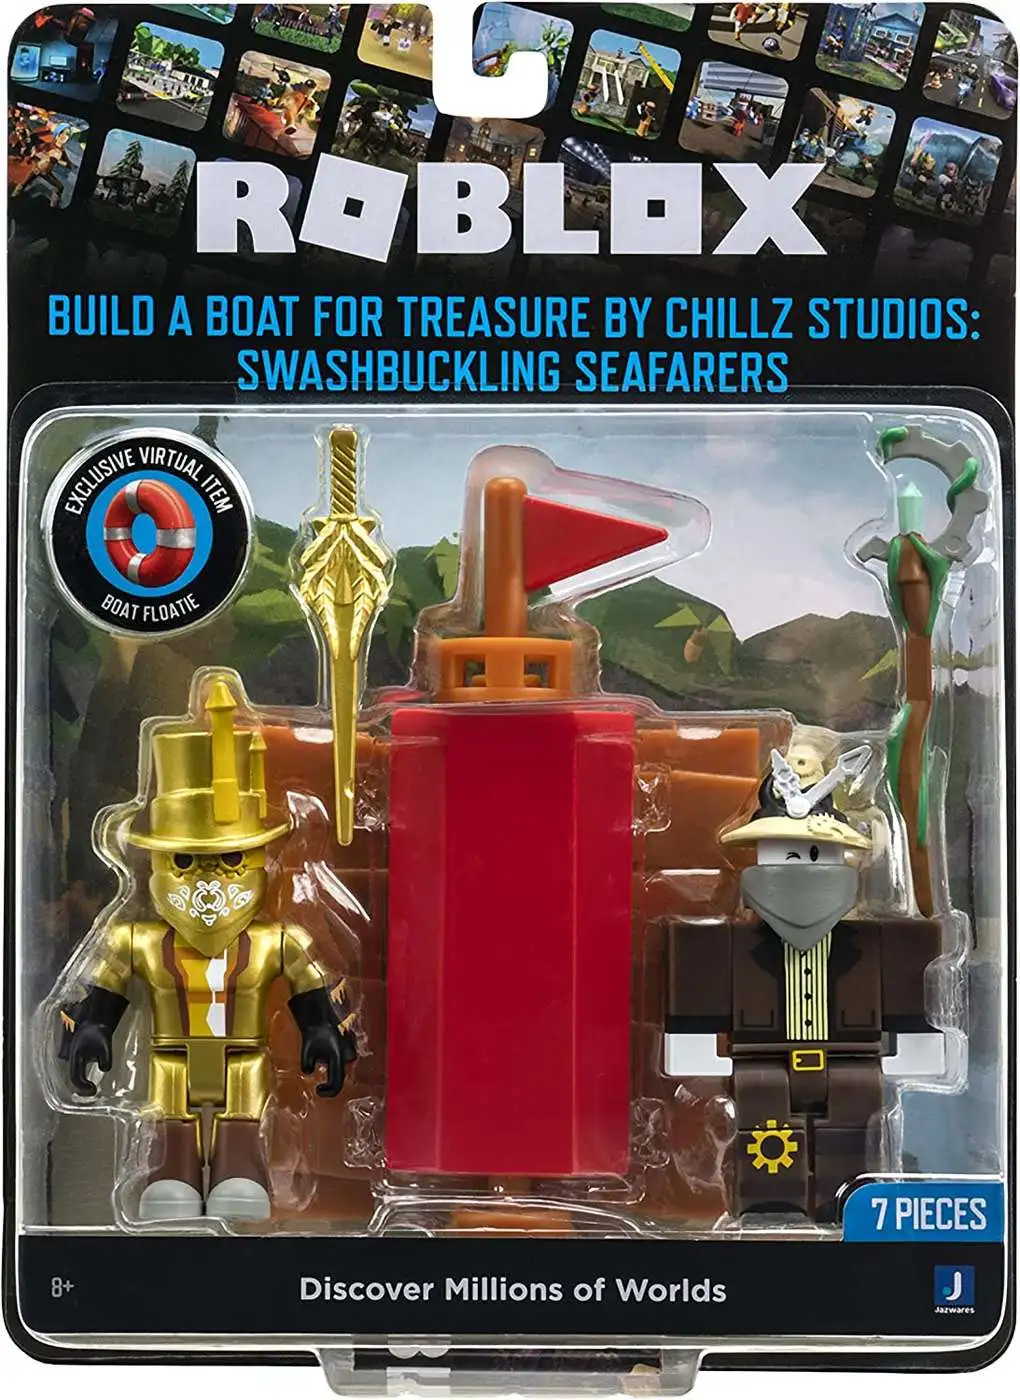 Roblox Action Collection - Build a Boat for Treasure by Chillz Studios:  Swashbuckling Seafarers Game Pack [Includes Exclusive Virtual Code]